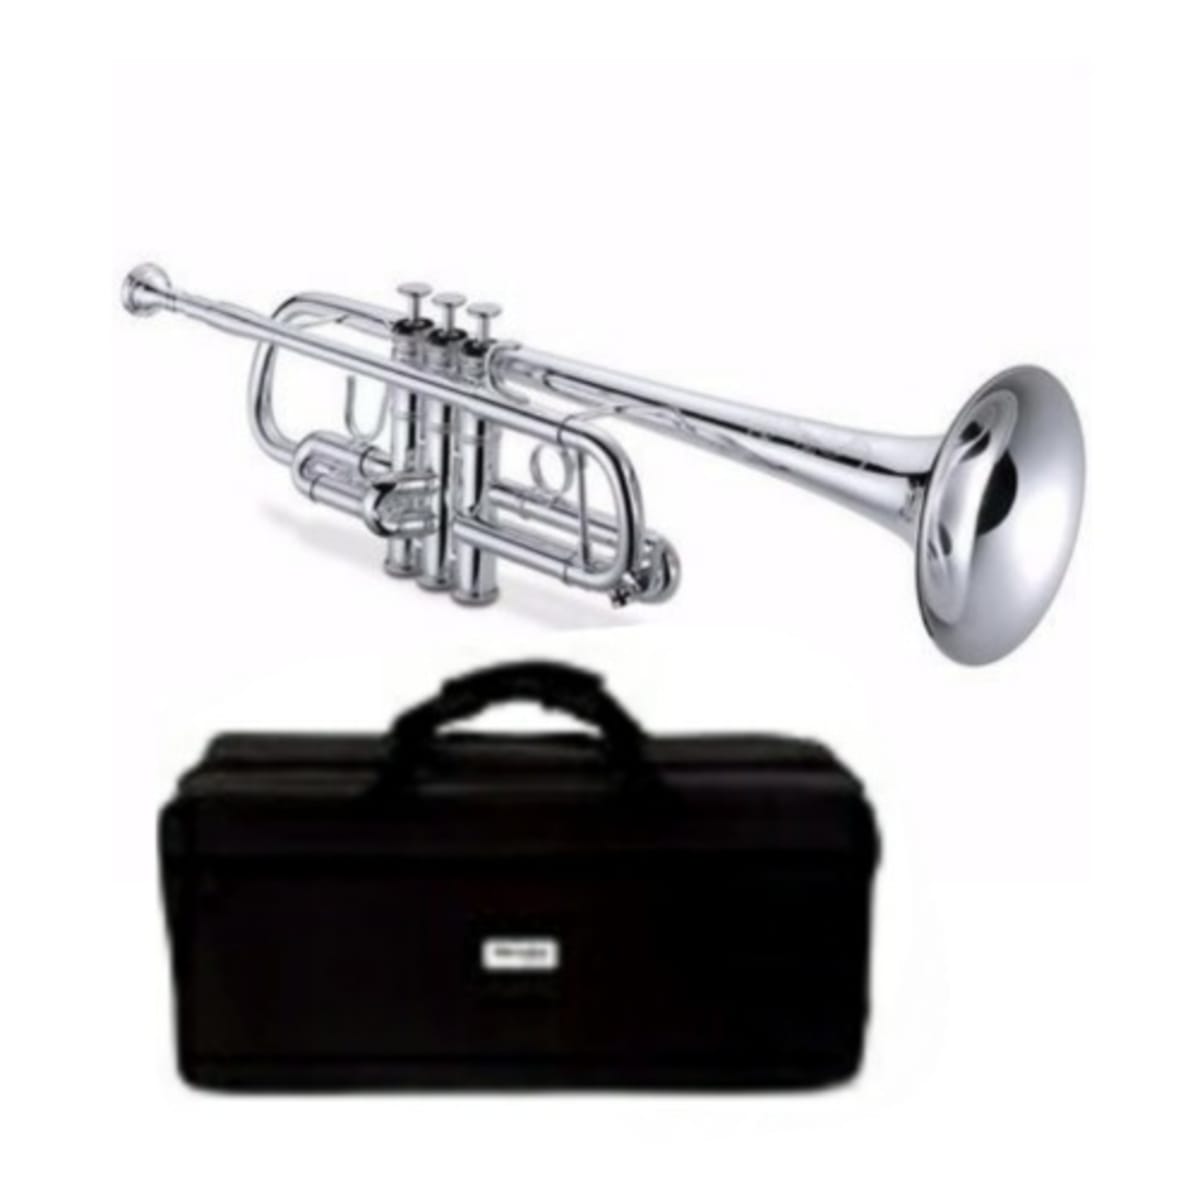 Premier Trumpet with Accessories - Silver